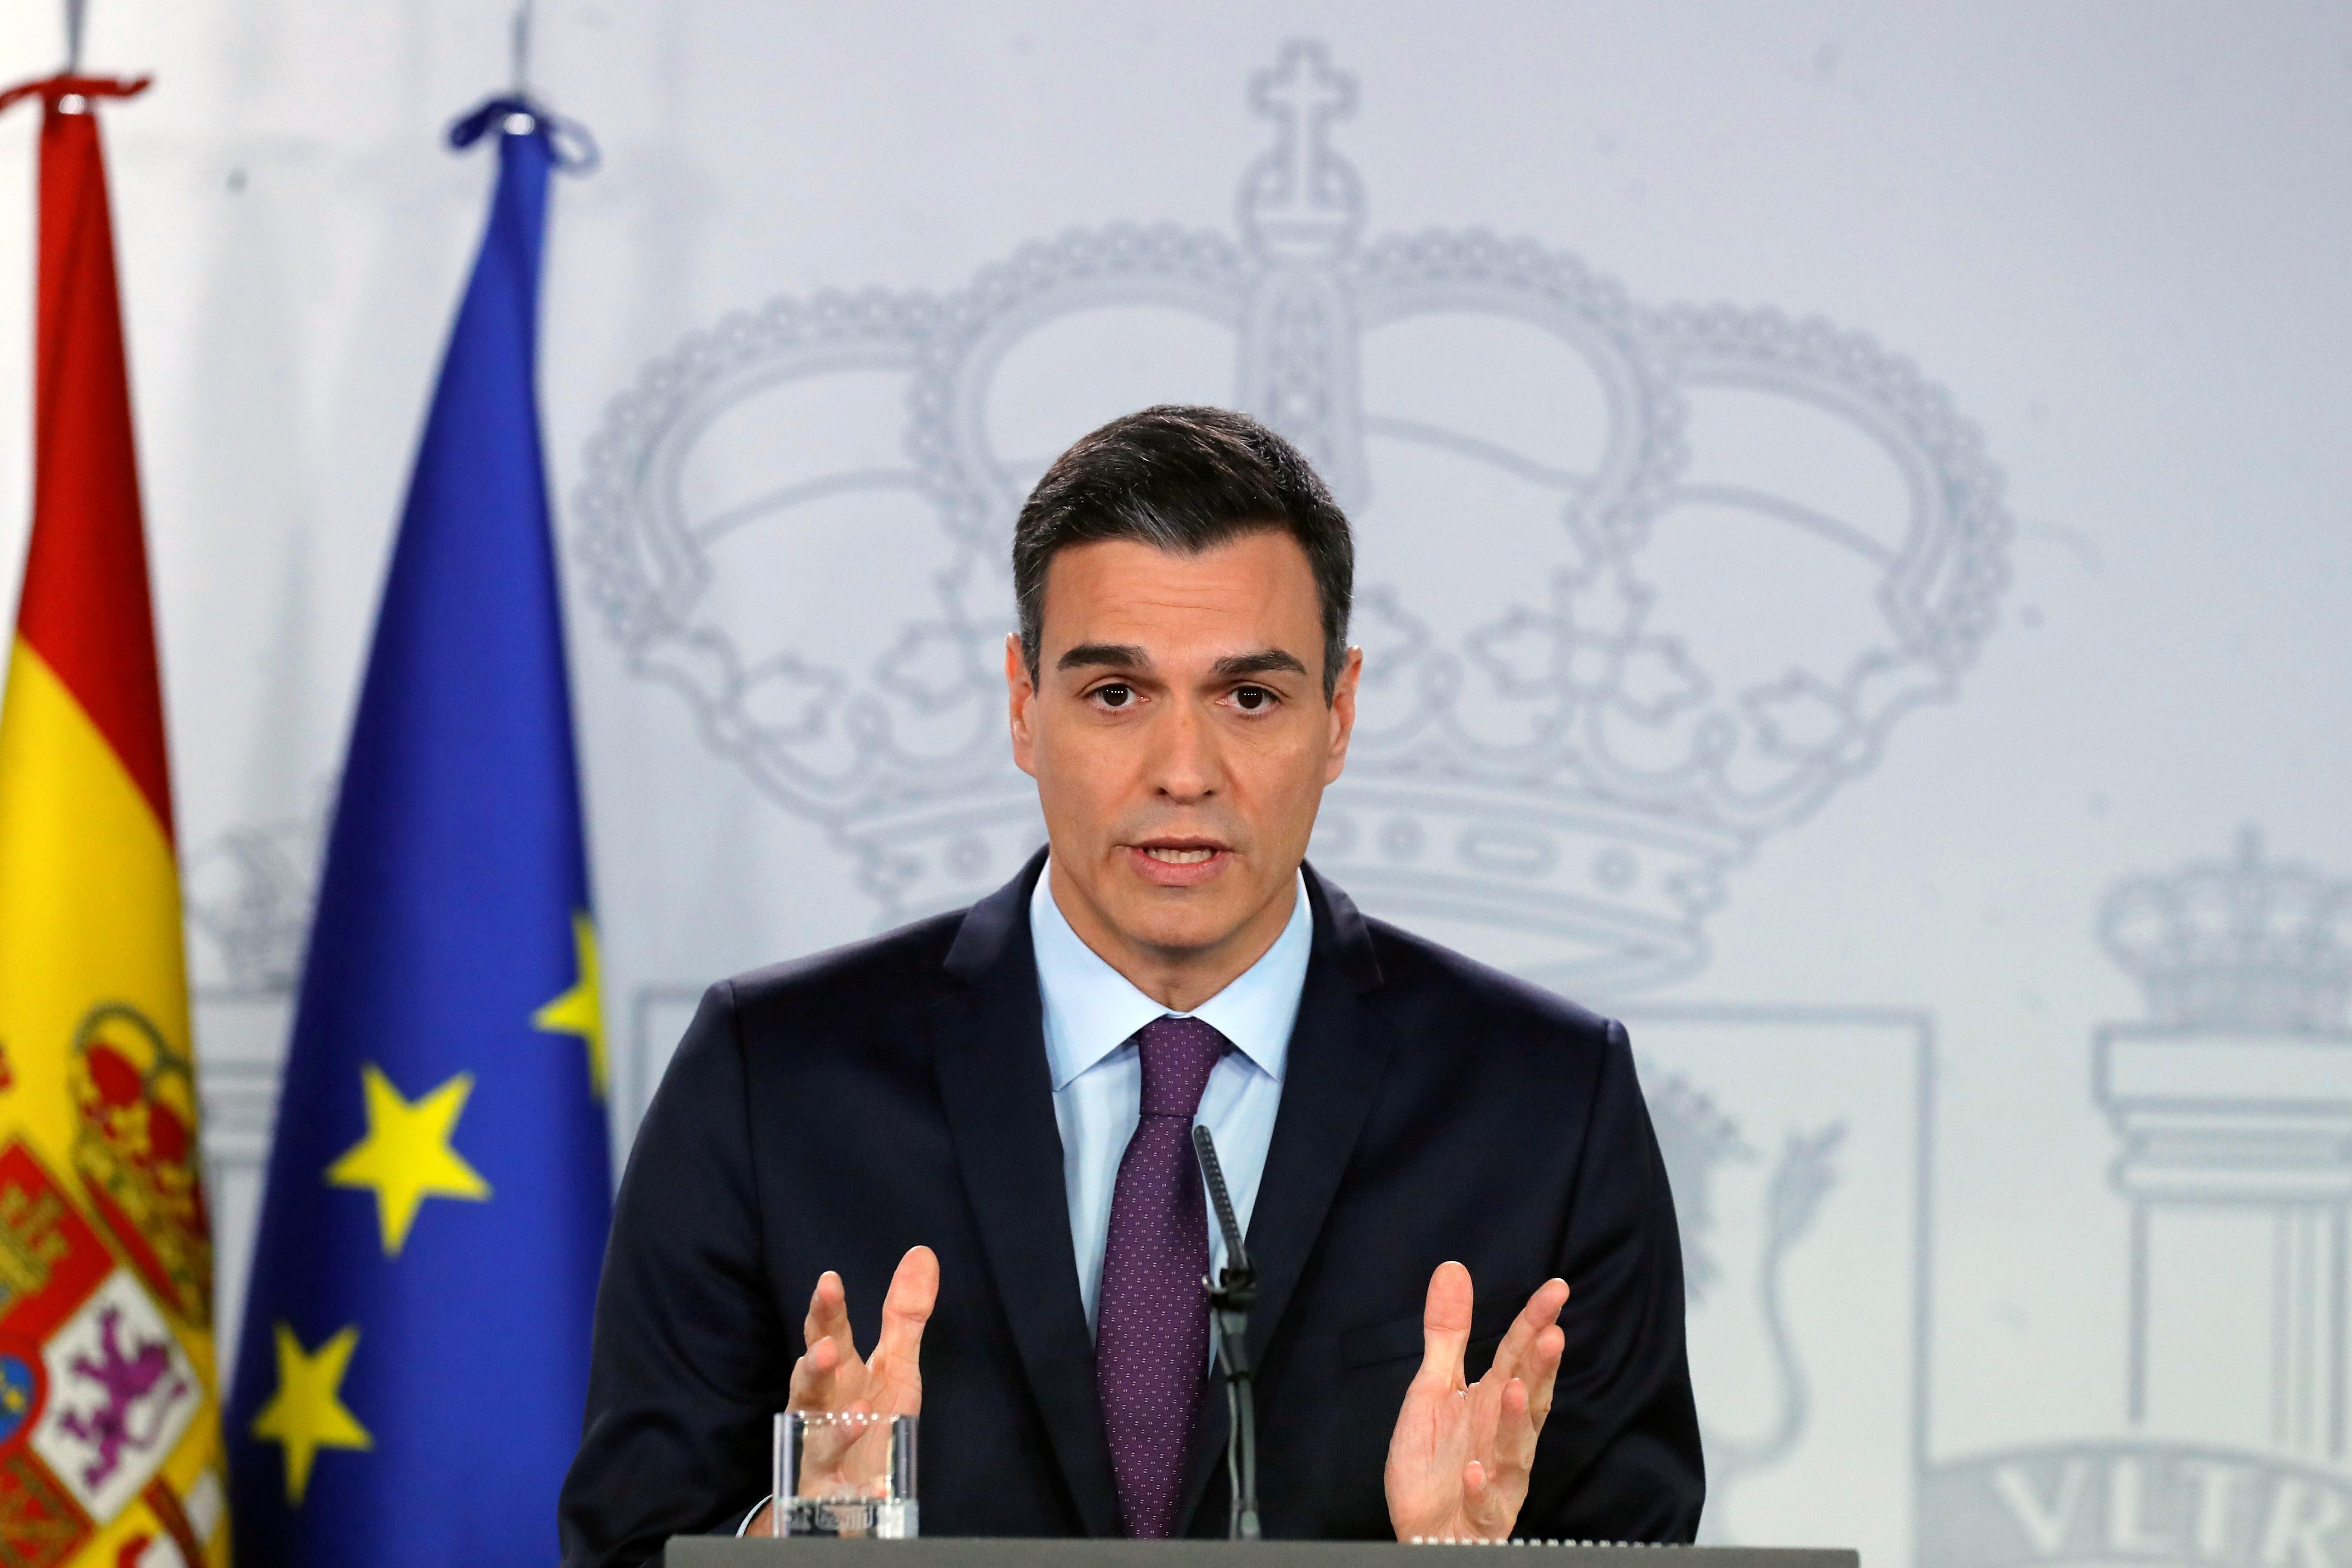 Sánchez on Torra's 21 points: "Outside the Constitution it's all a Catalan monologue"